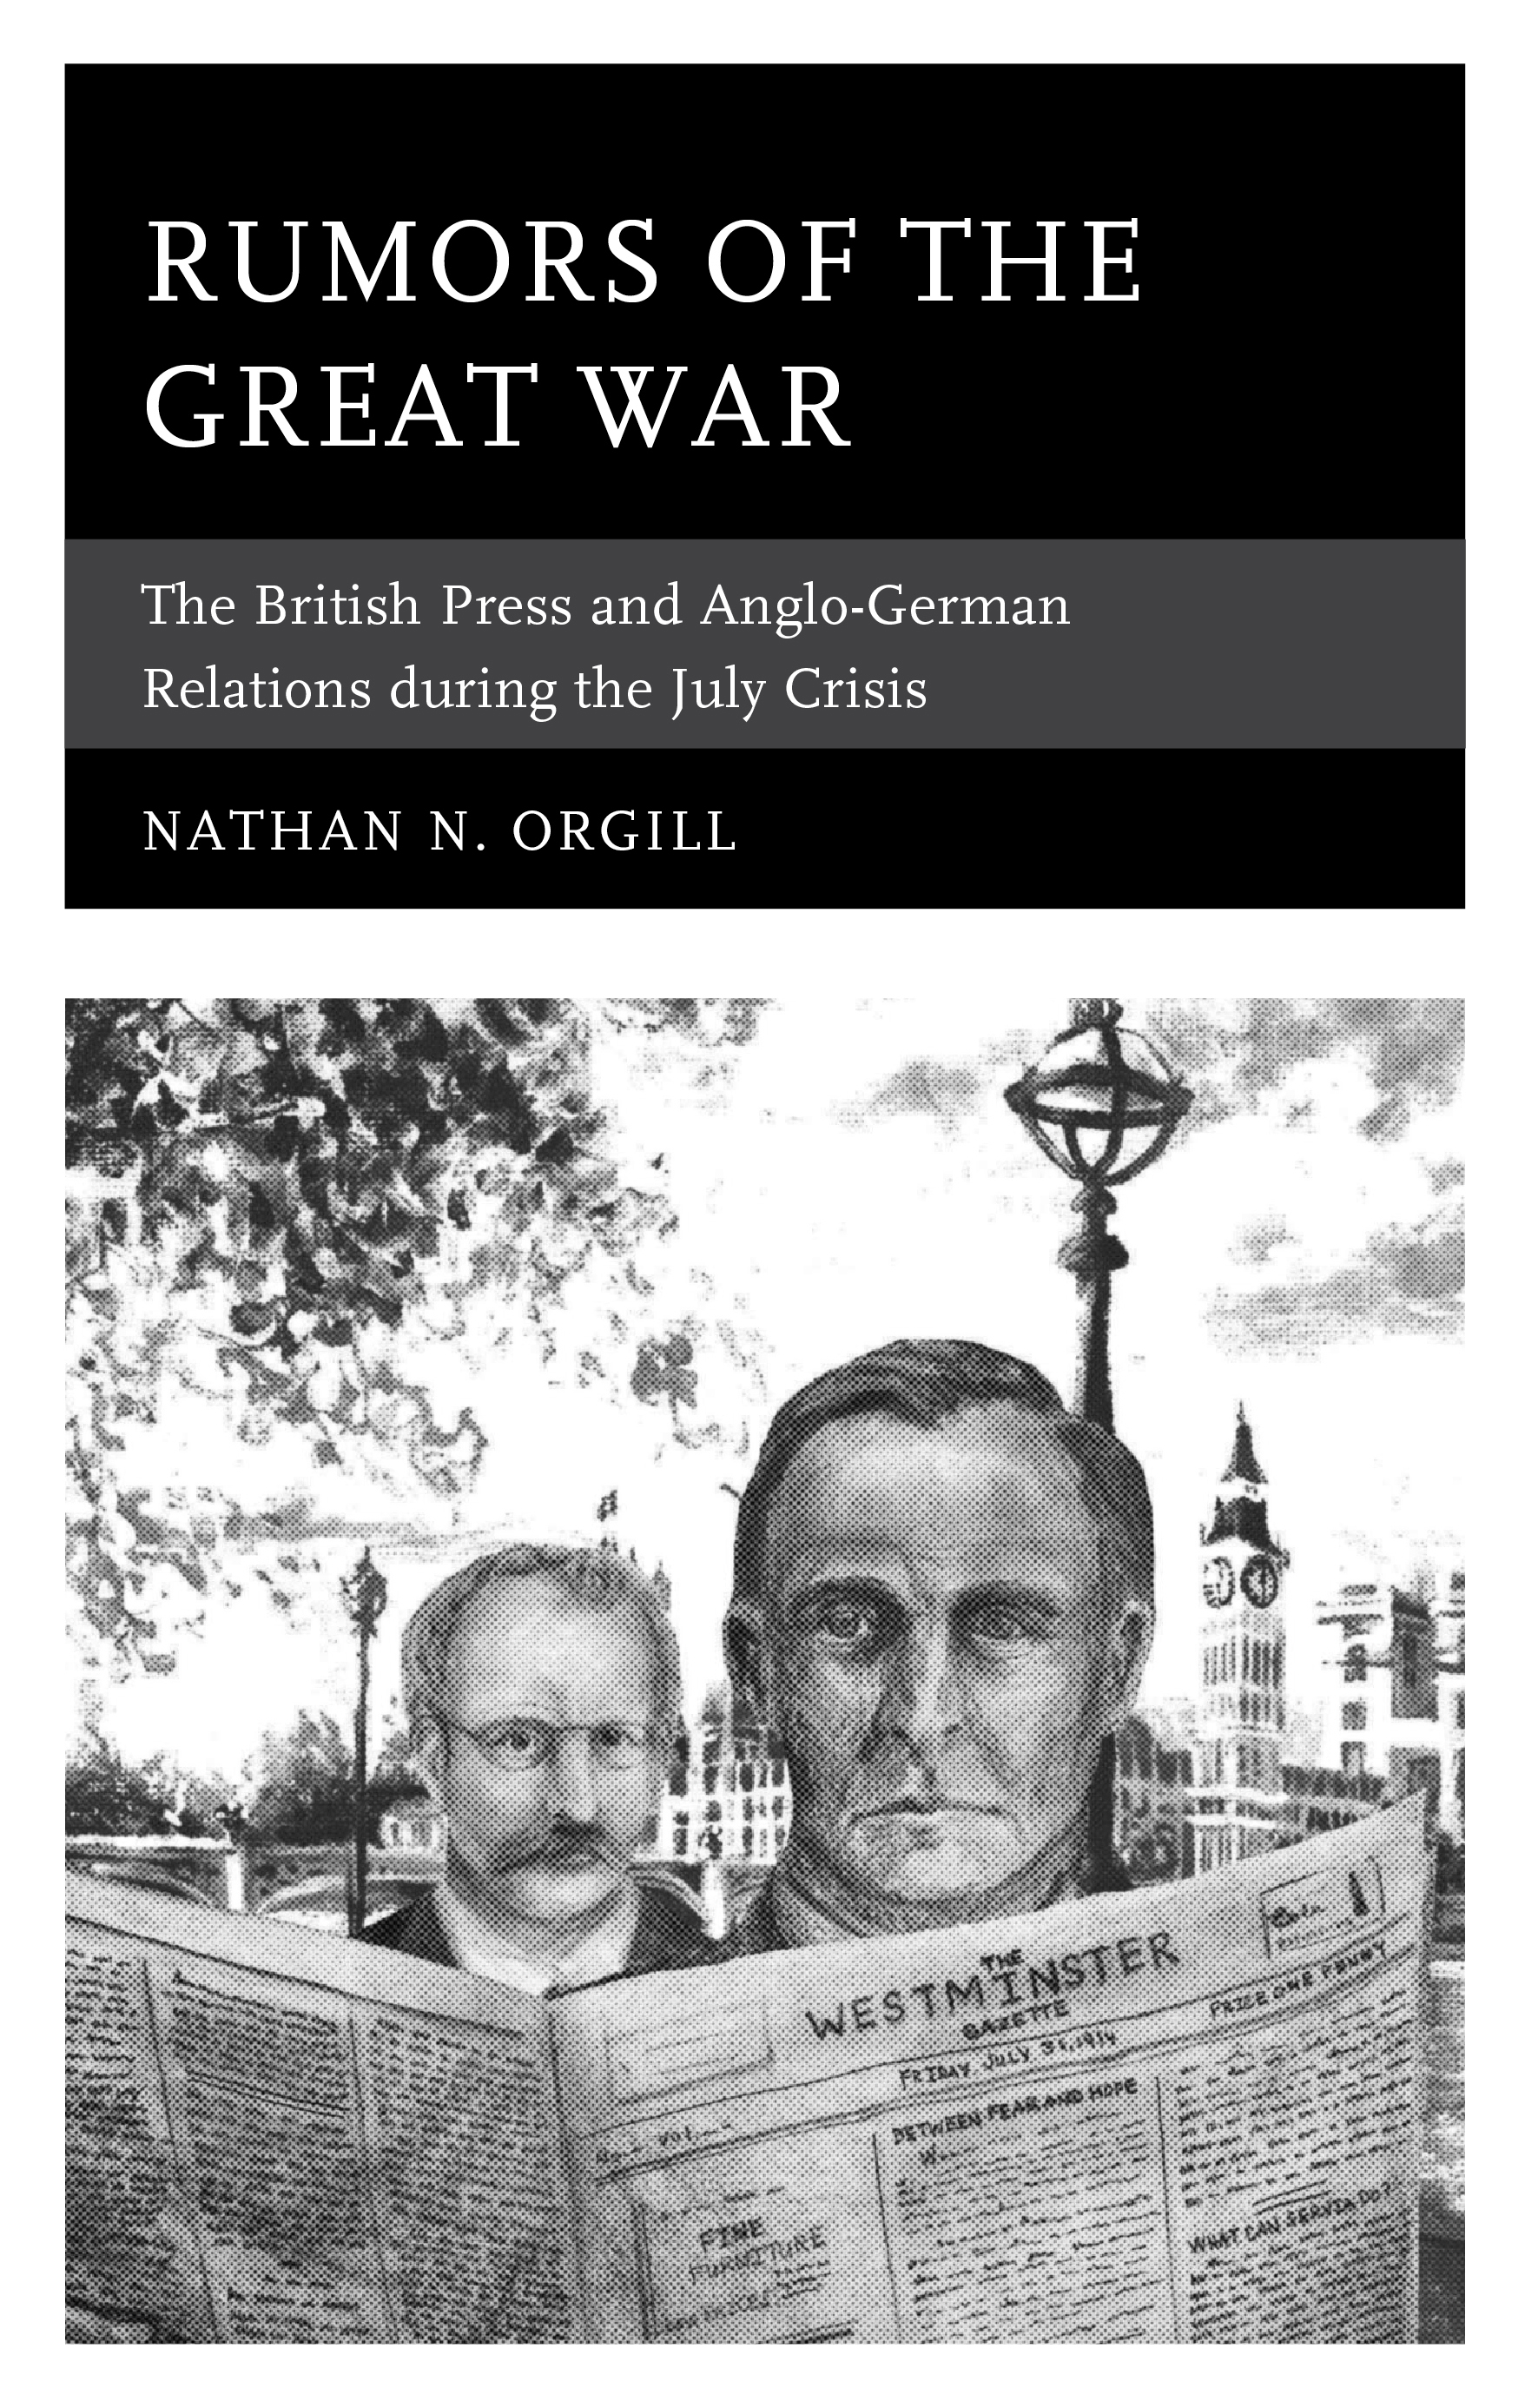 Rumors of the Great War: The British Press and Anglo-German Relations during the July Crisis